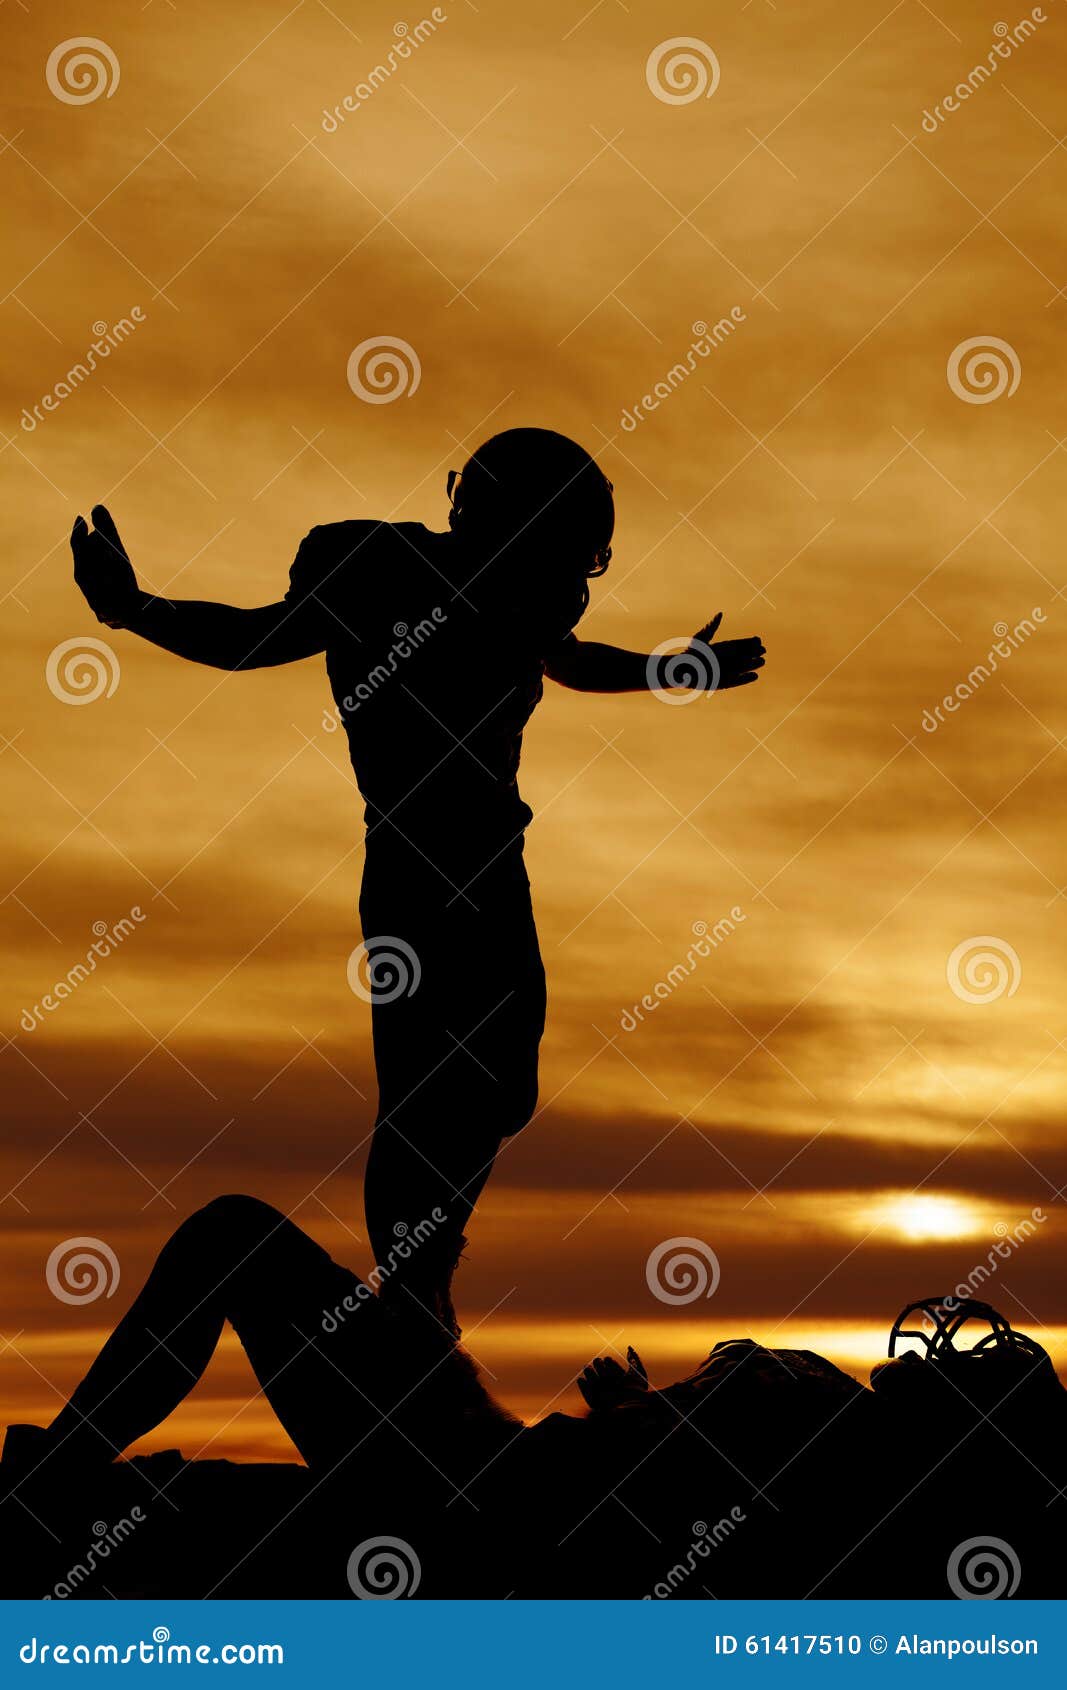 Silhouette of a Football Player after a Tackle Stock Photo - Image